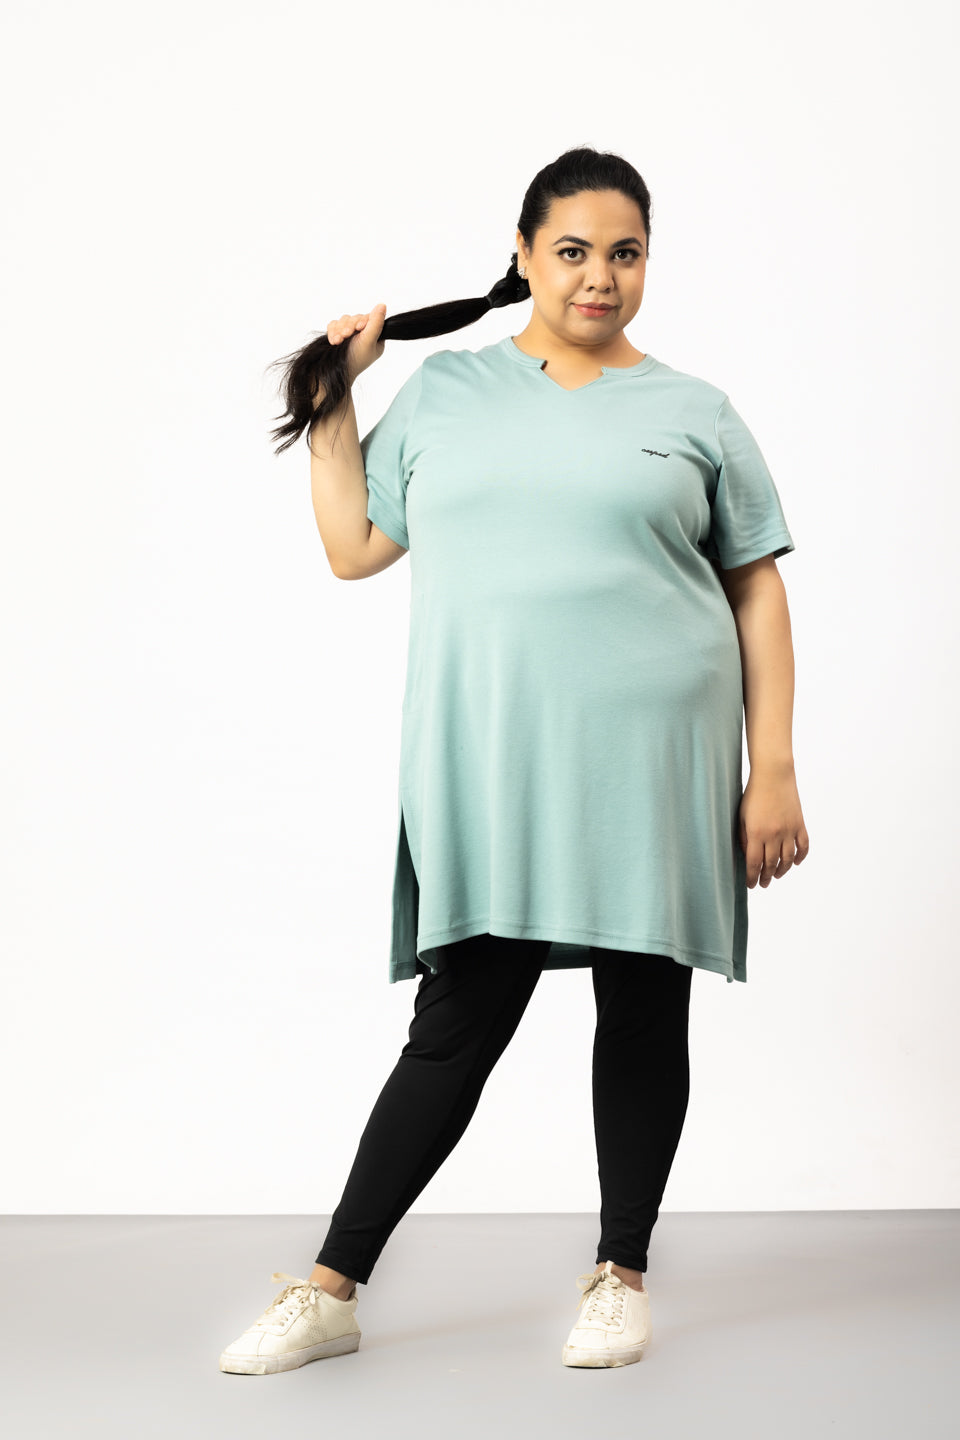 Plus Size Half Sleeves Long Top For Women - Sage